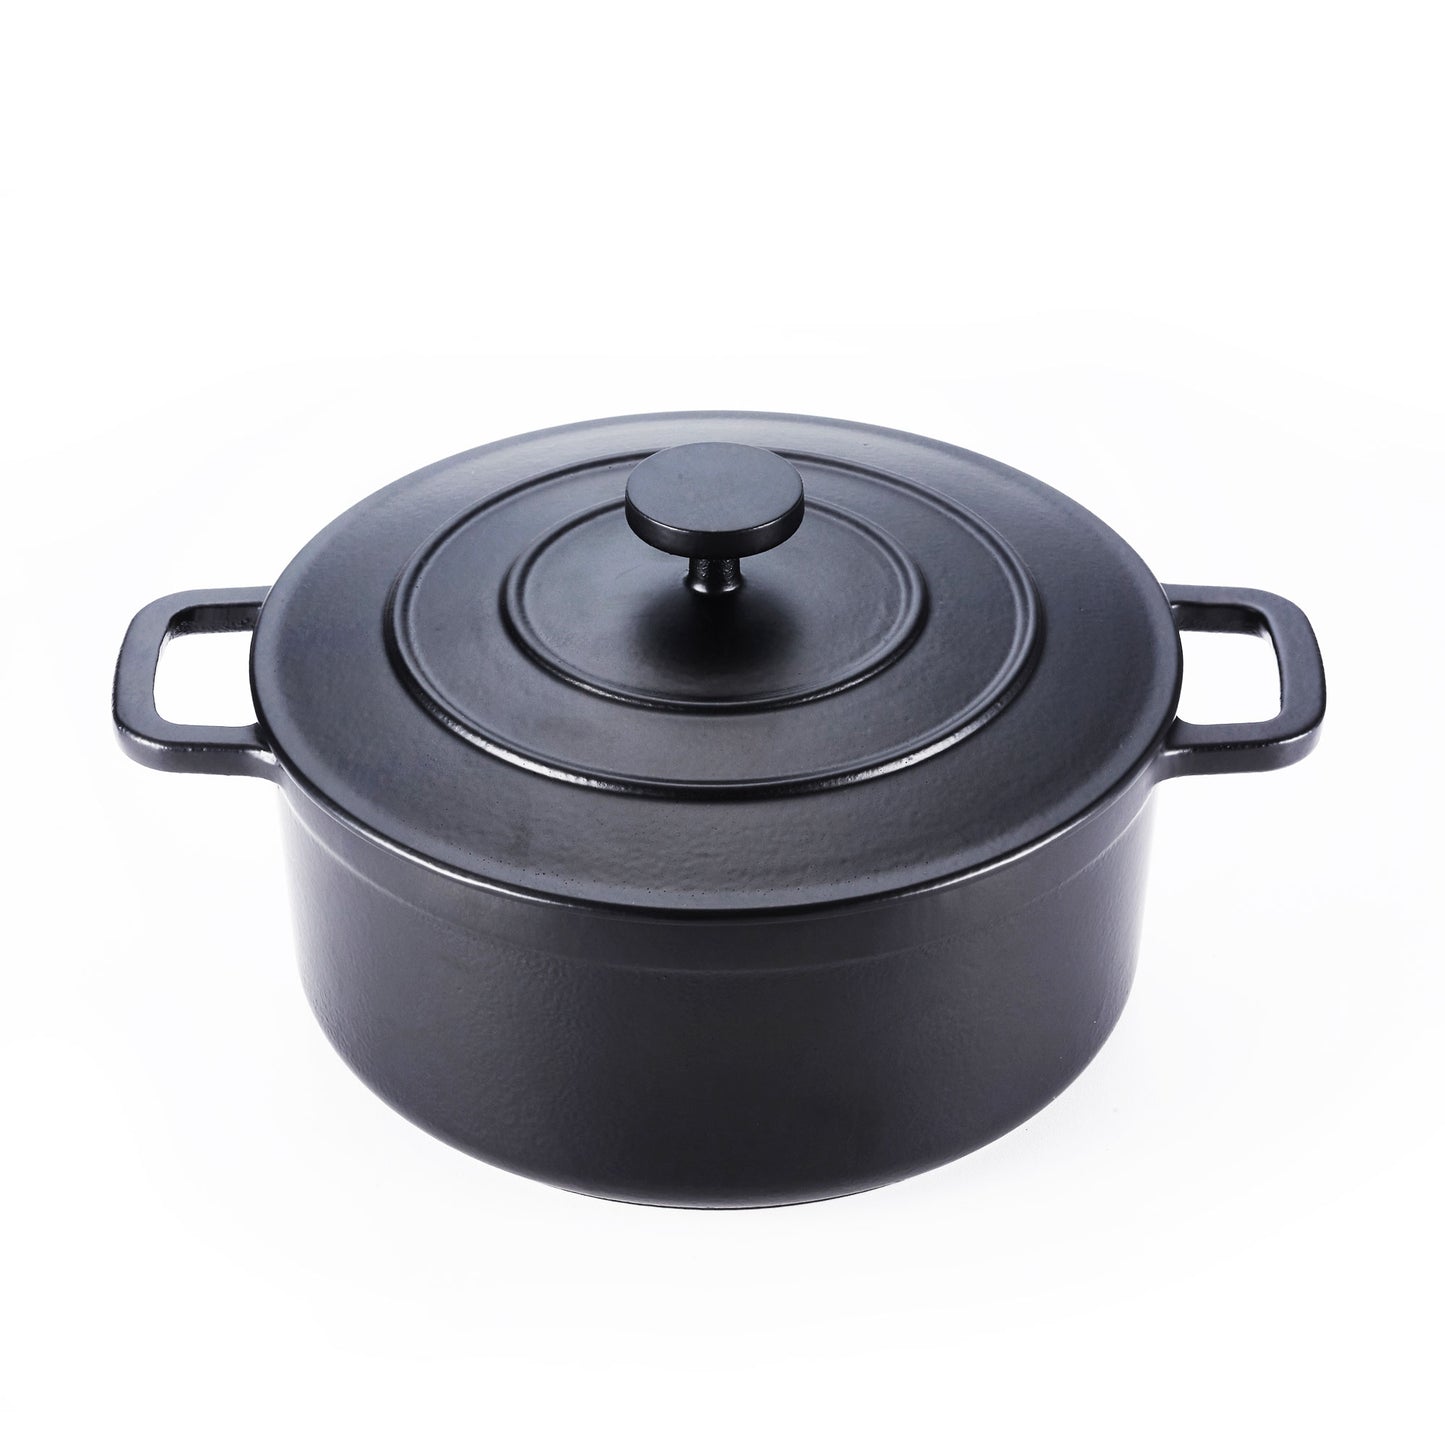  MOOSSE Premium Dutch Oven, Enameled Cast iron Pot for Induction  Cooktop, Stove, Oven, No Seasoning Required, Made in Korea, 4.2 Quarts  (4L), 9.4” (24 cm): Home & Kitchen